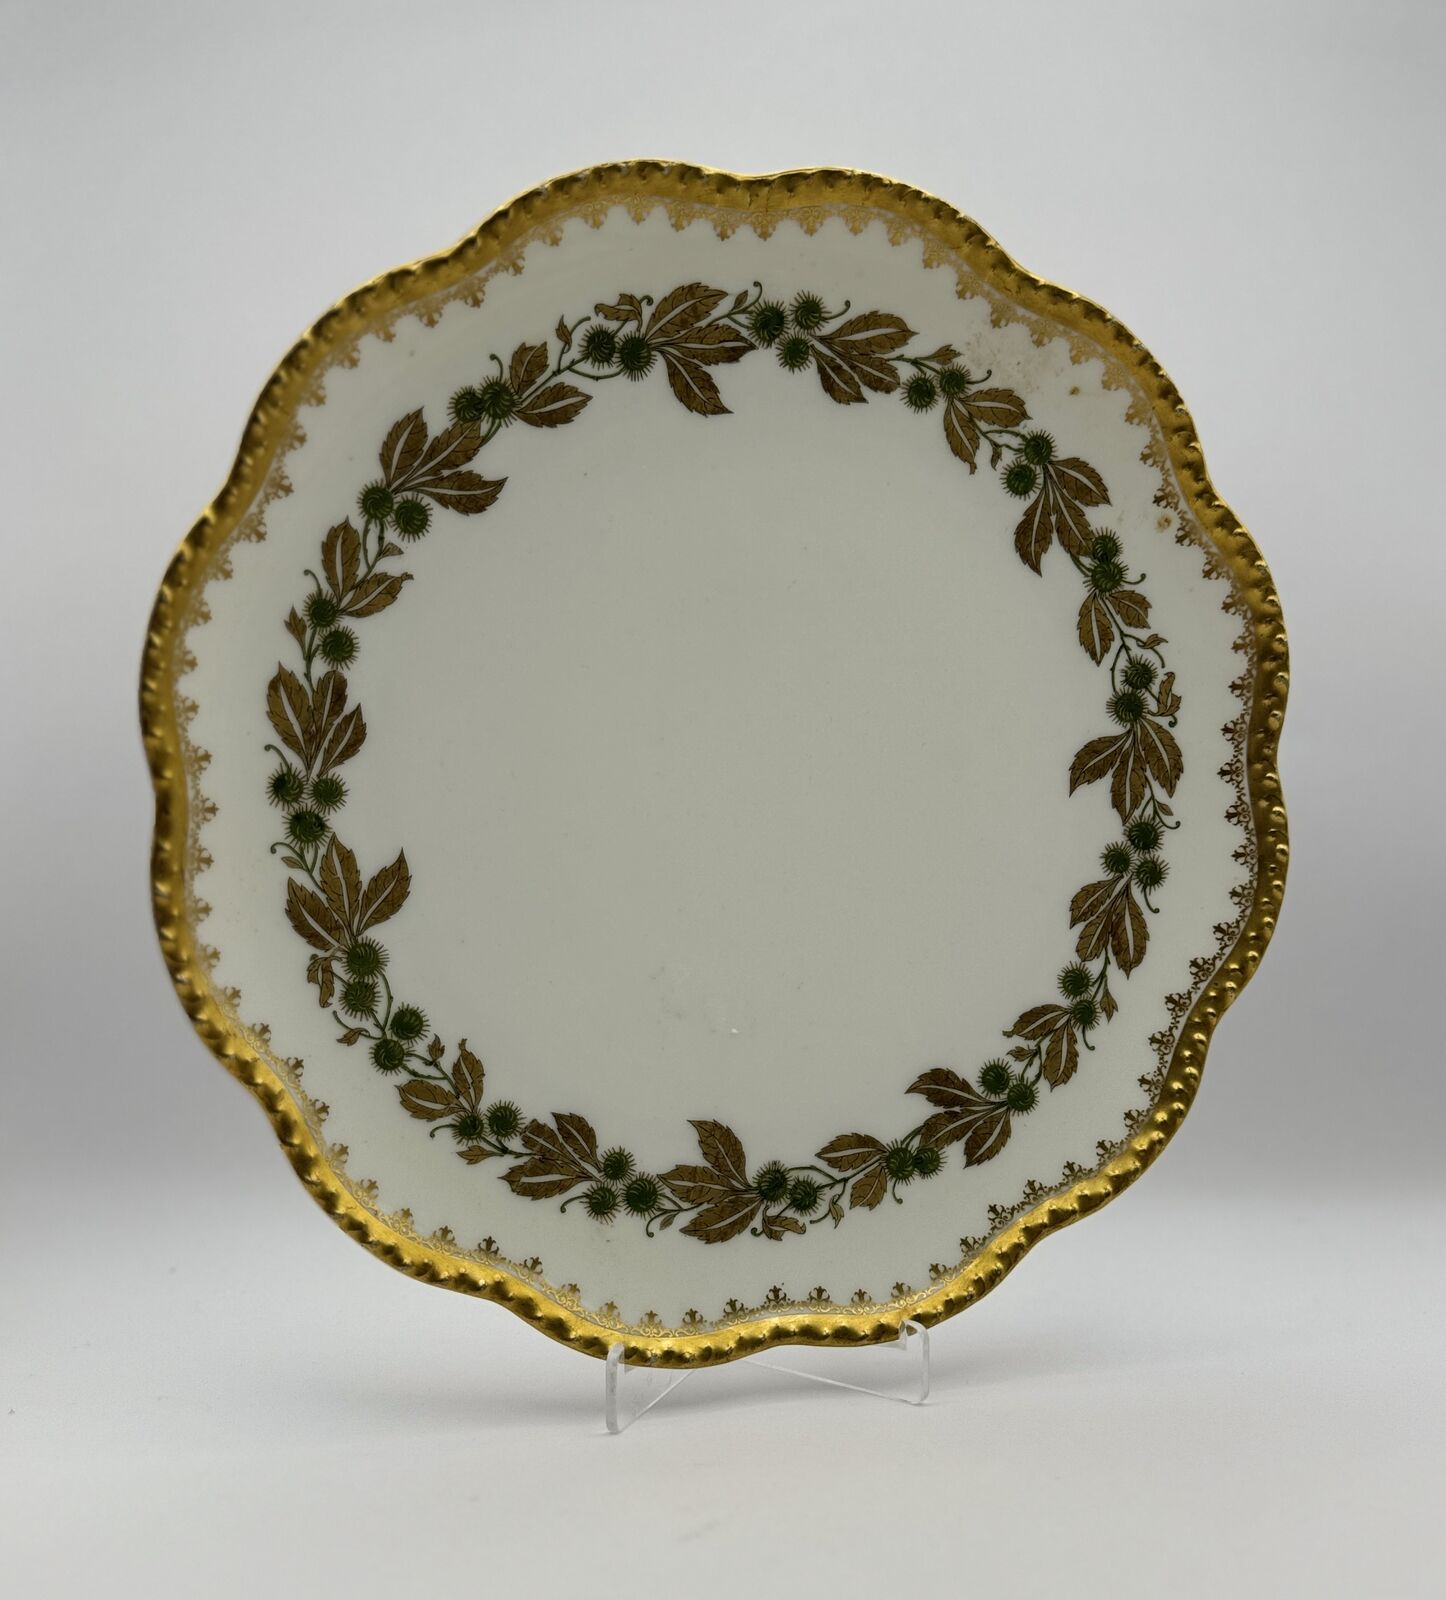 Rare Haviland & Co. Limoges Hand-Painted Plate with Gold Leaf Design